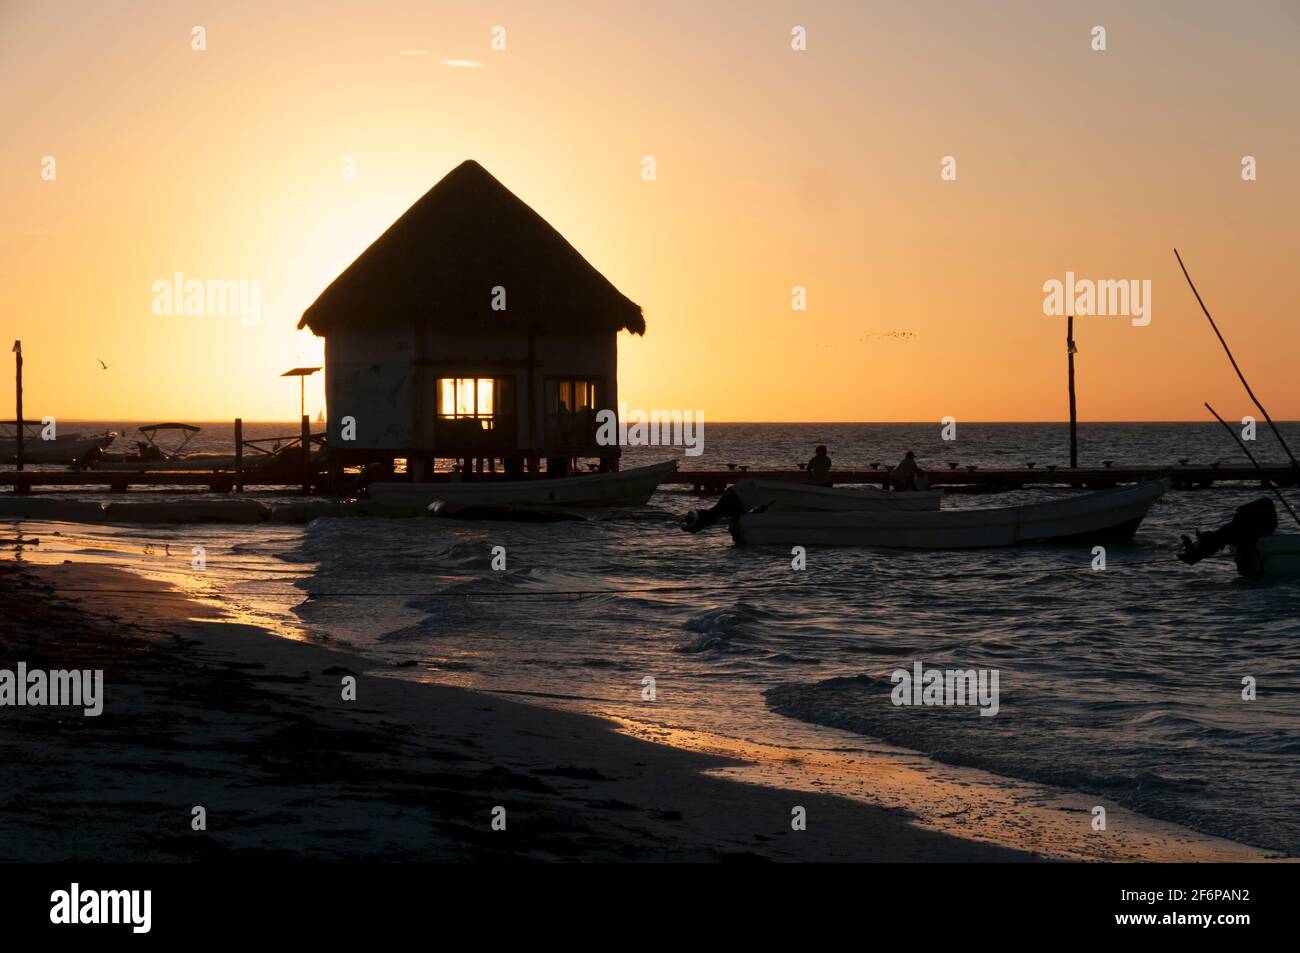 A small fishing shack on a wooden pier over the sea at sunset on Holbox Island in Mexico. In the background are the sky and fishing boats. Travel Tourism Stock Photo